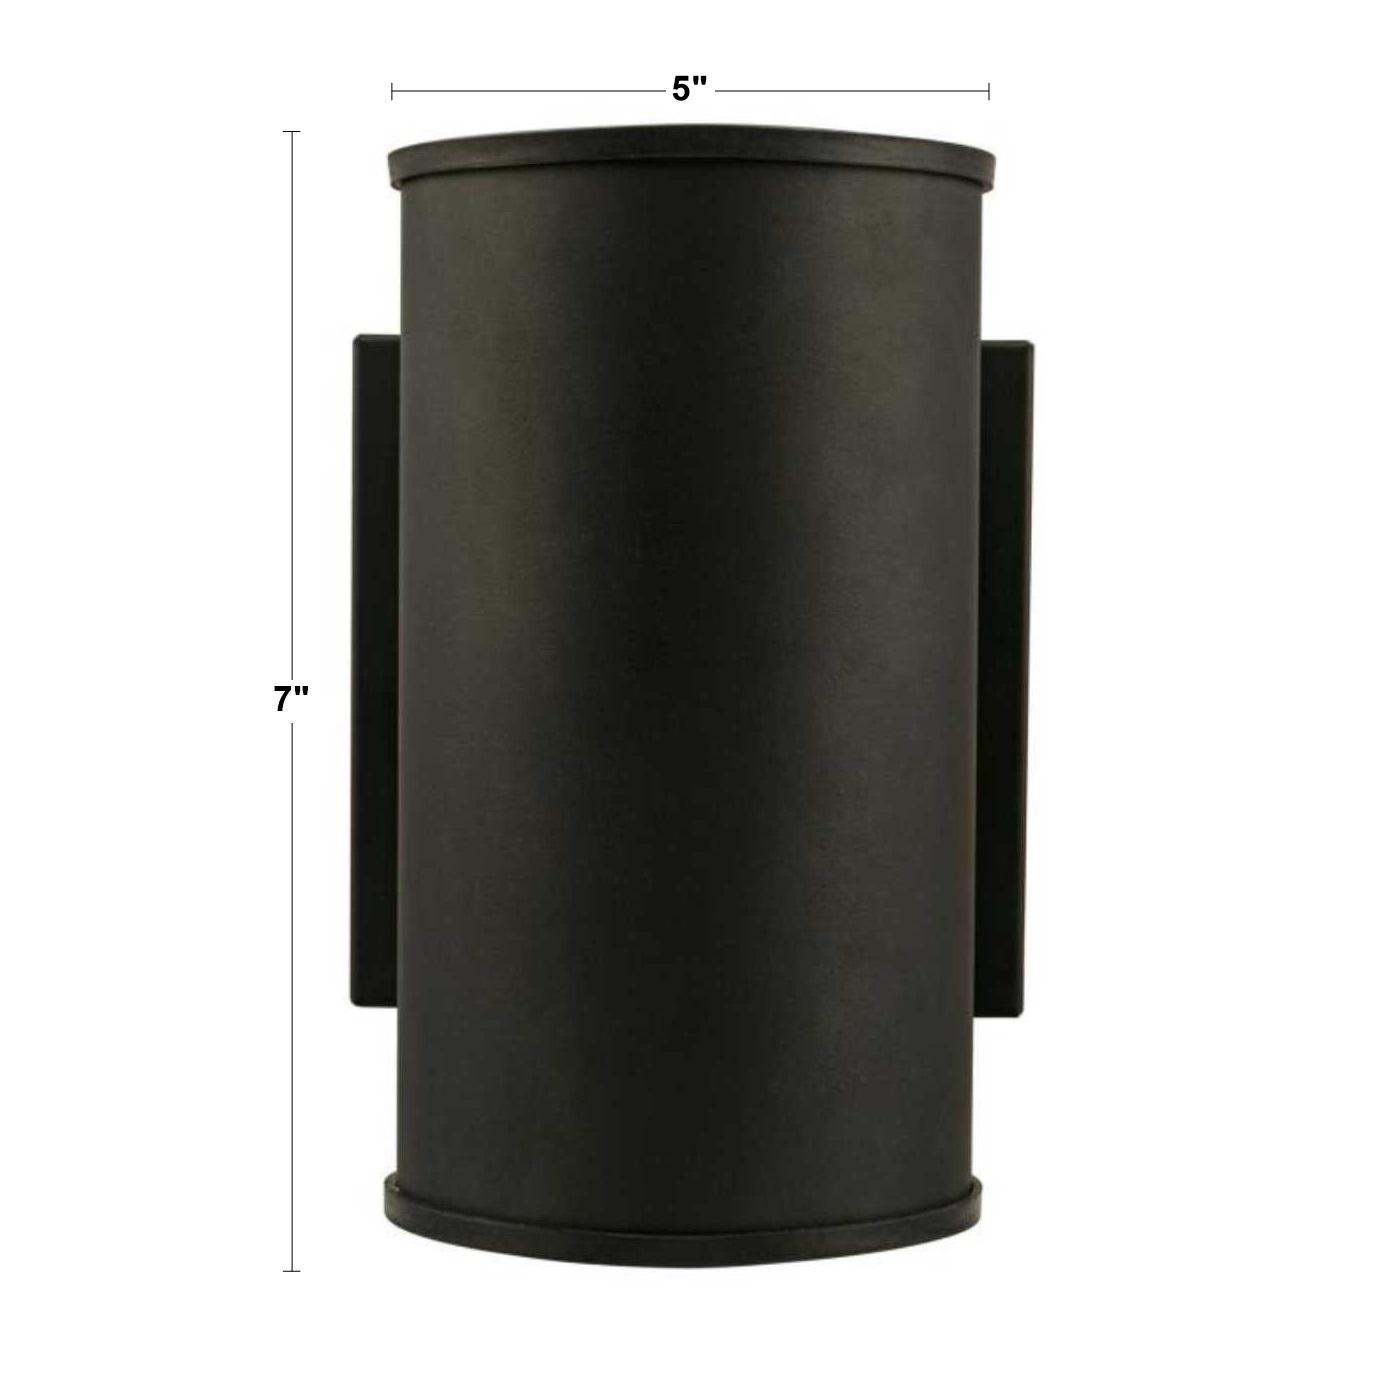 Mayslick 7 In 1 Light LED Outdoor Cylinder Sconce Dimmable 2700K Bronze Finish